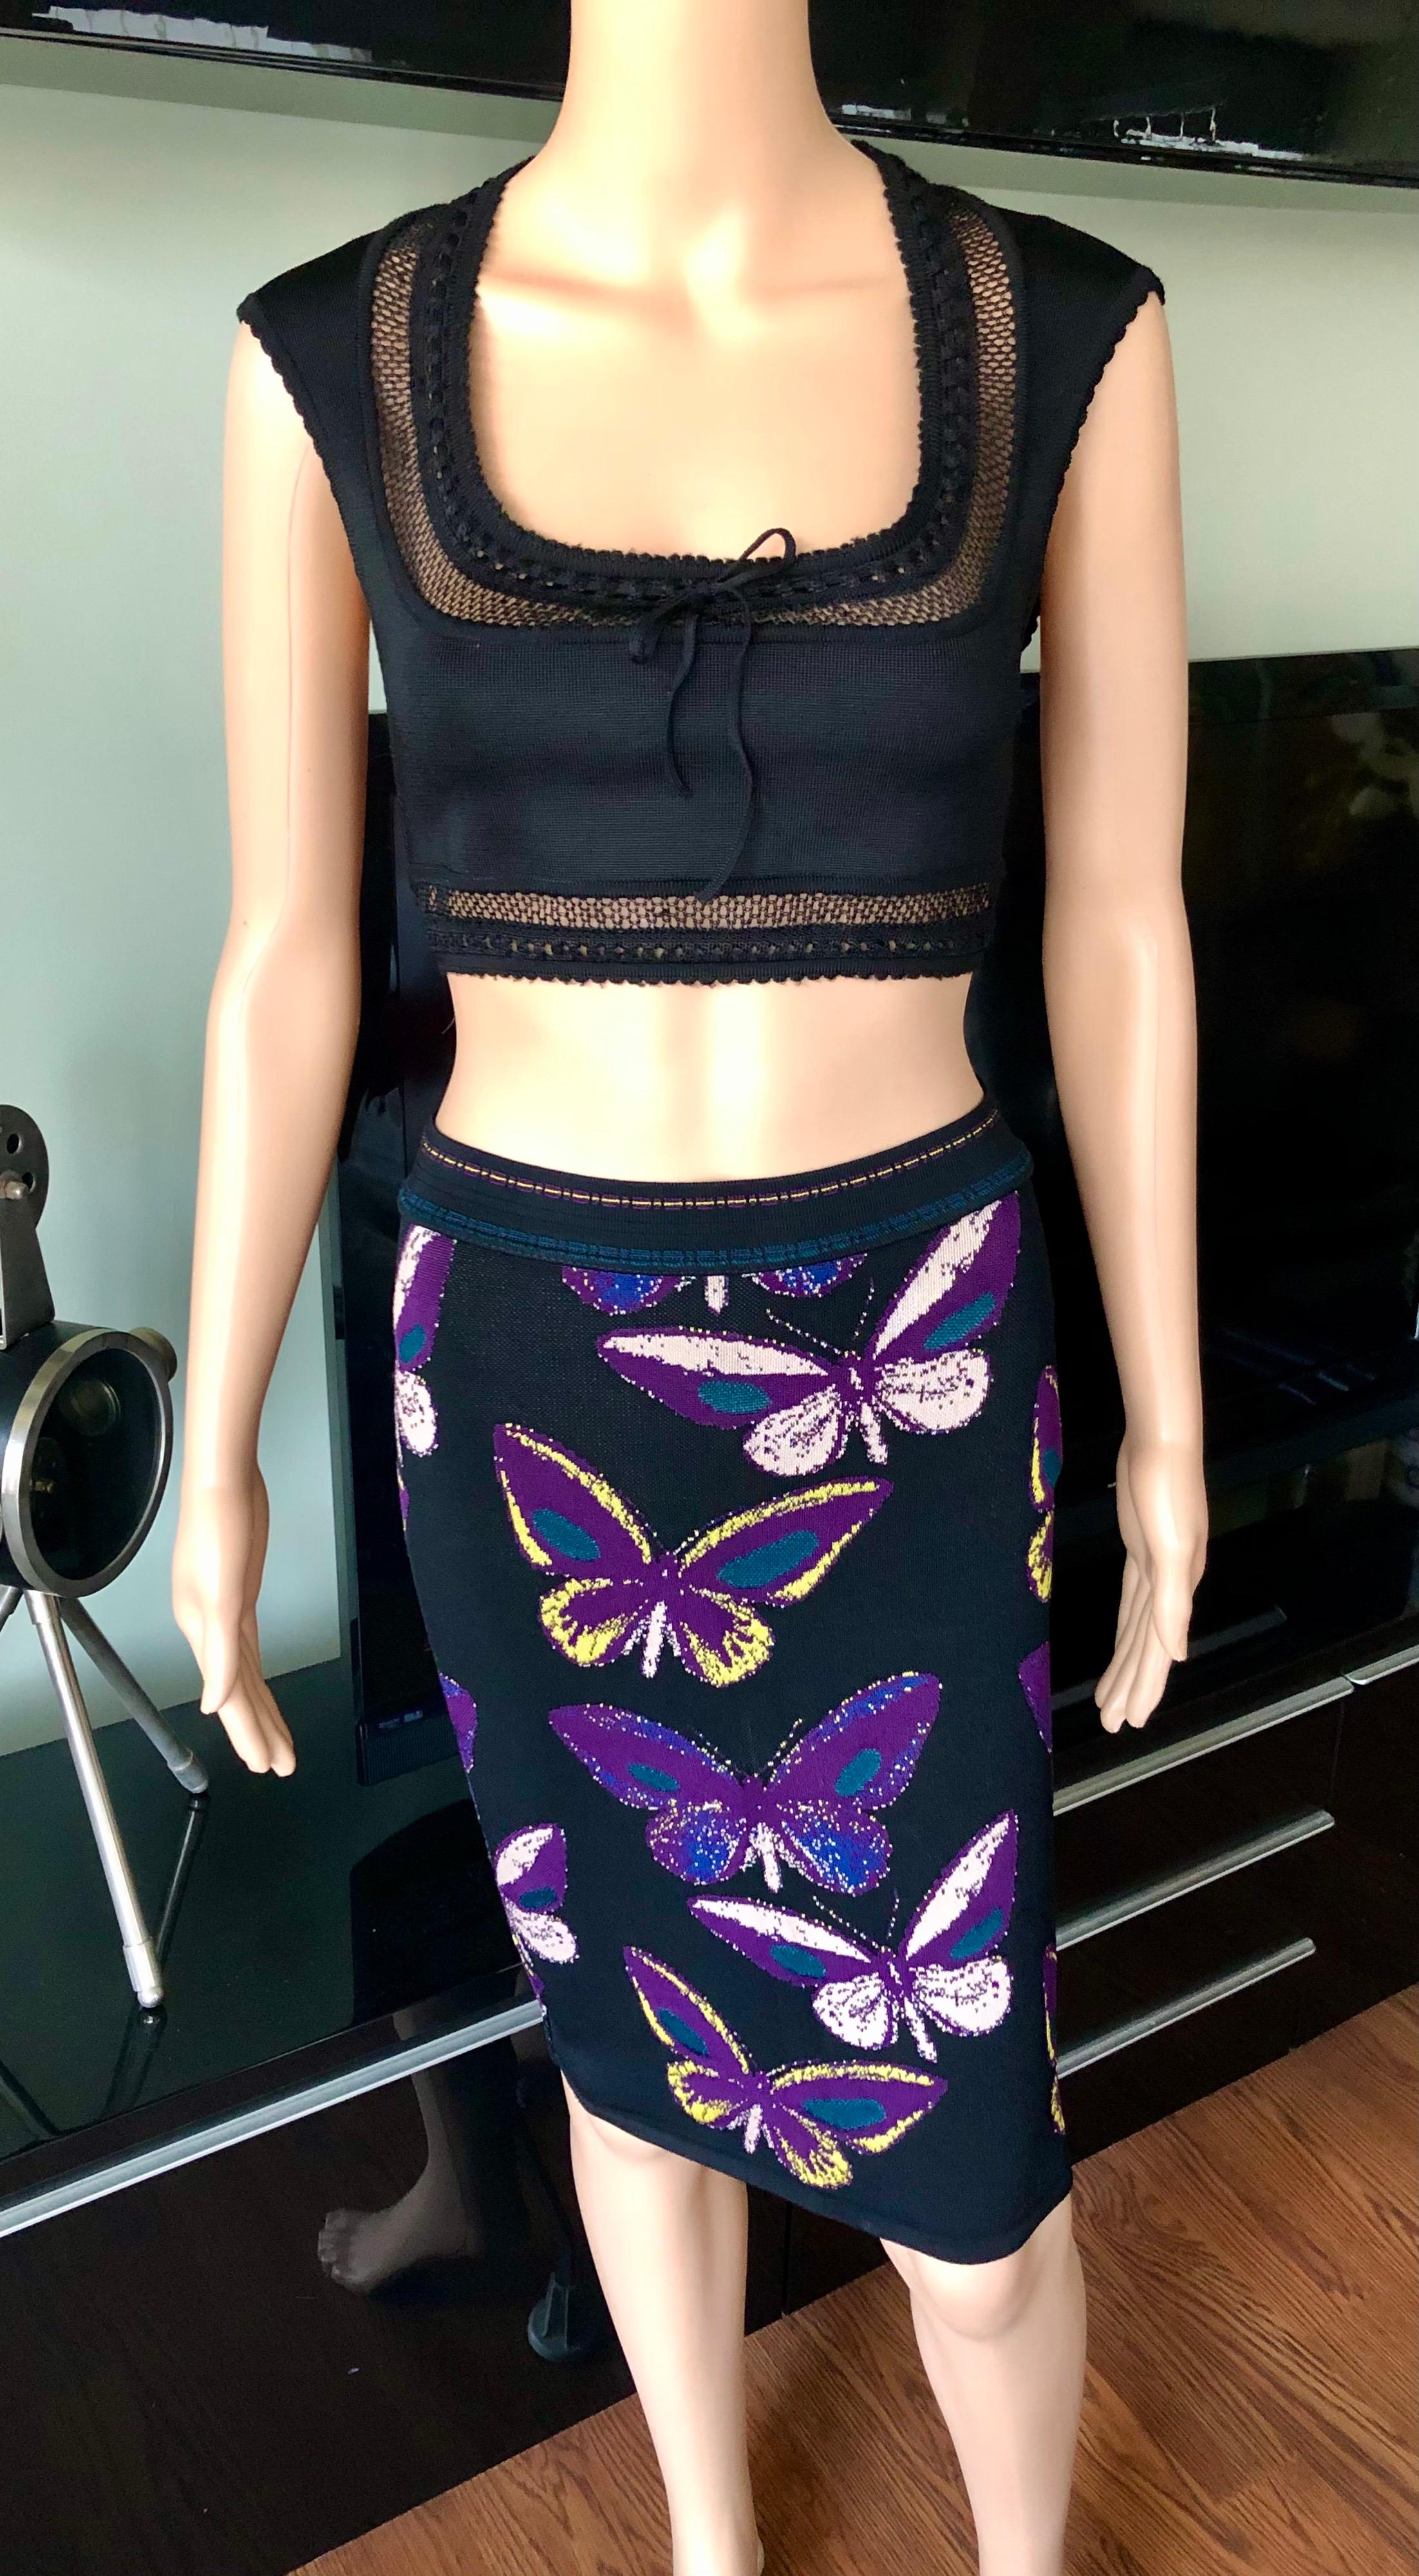 Azzedine Alaia 1990's Vintage Butterfly Skirt and Crop Top Ensemble 2 Piece Set Size S/M

Please note the crop top is size S and the skirt is size M.
